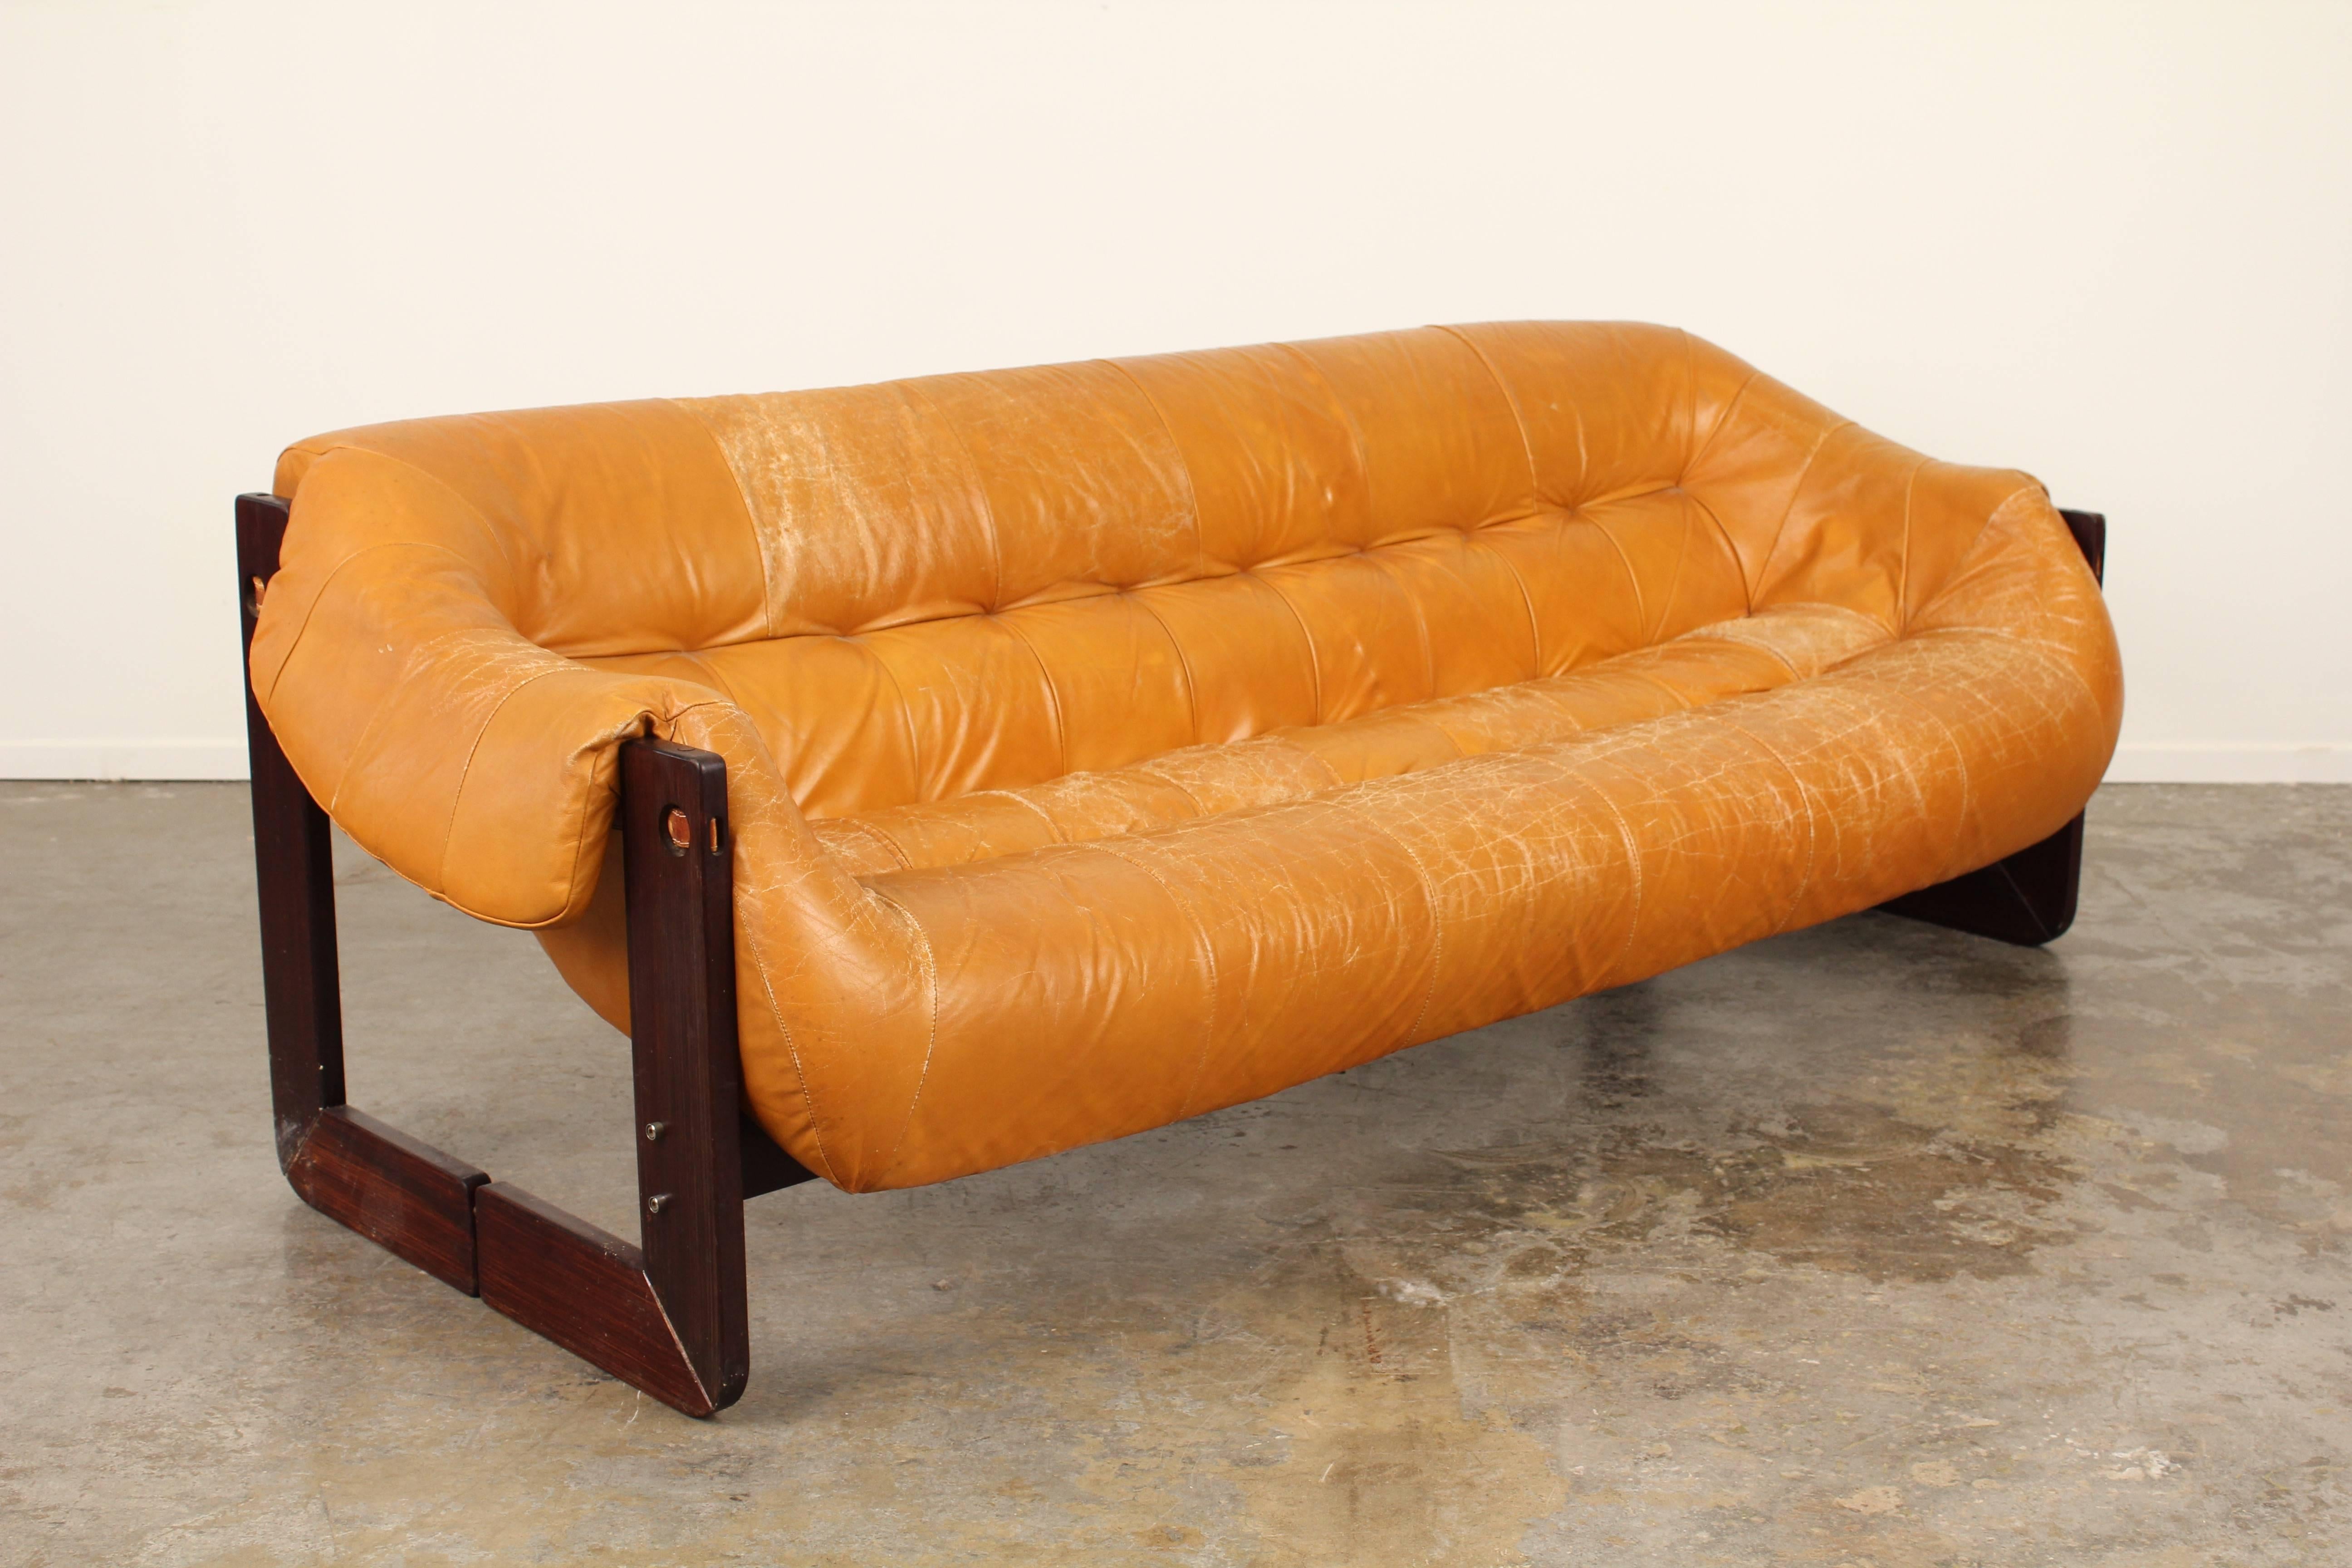 Fantastic vintage sofa by Percival Lafer. Brazilian rosewood and original vintage camel colored leather with fantastic patina. Really unique design and construction make this a true statement piece. Matching lounge chair also available.